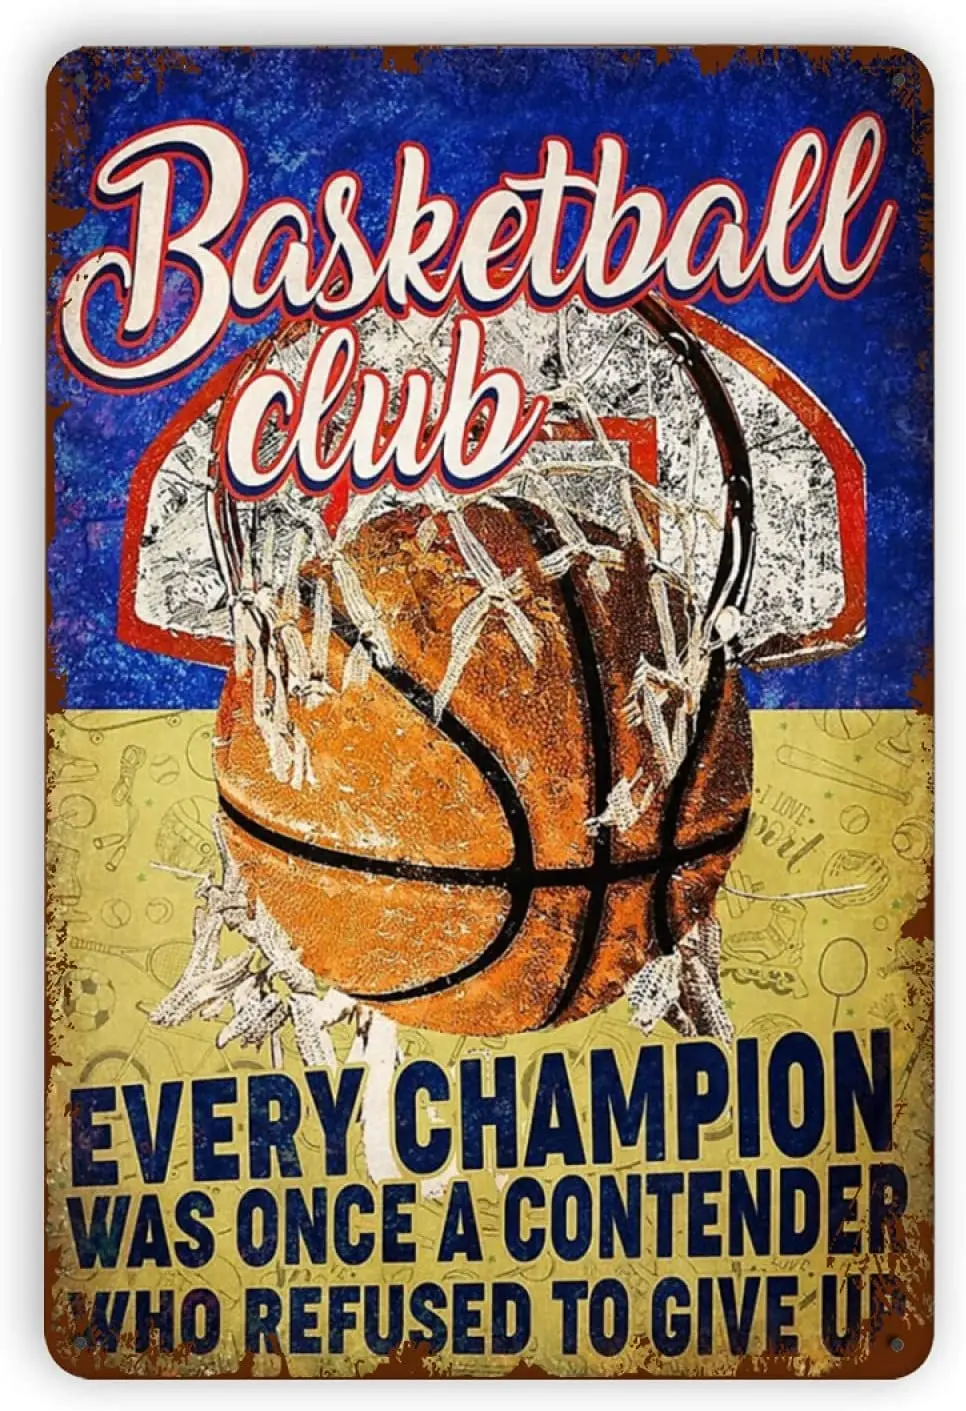 

Baby Kleidung Weant Metal Vintage Tin Signs Basketball Club Funny Wall Decor for Home Bars Pubs Cafes Retro metal sign